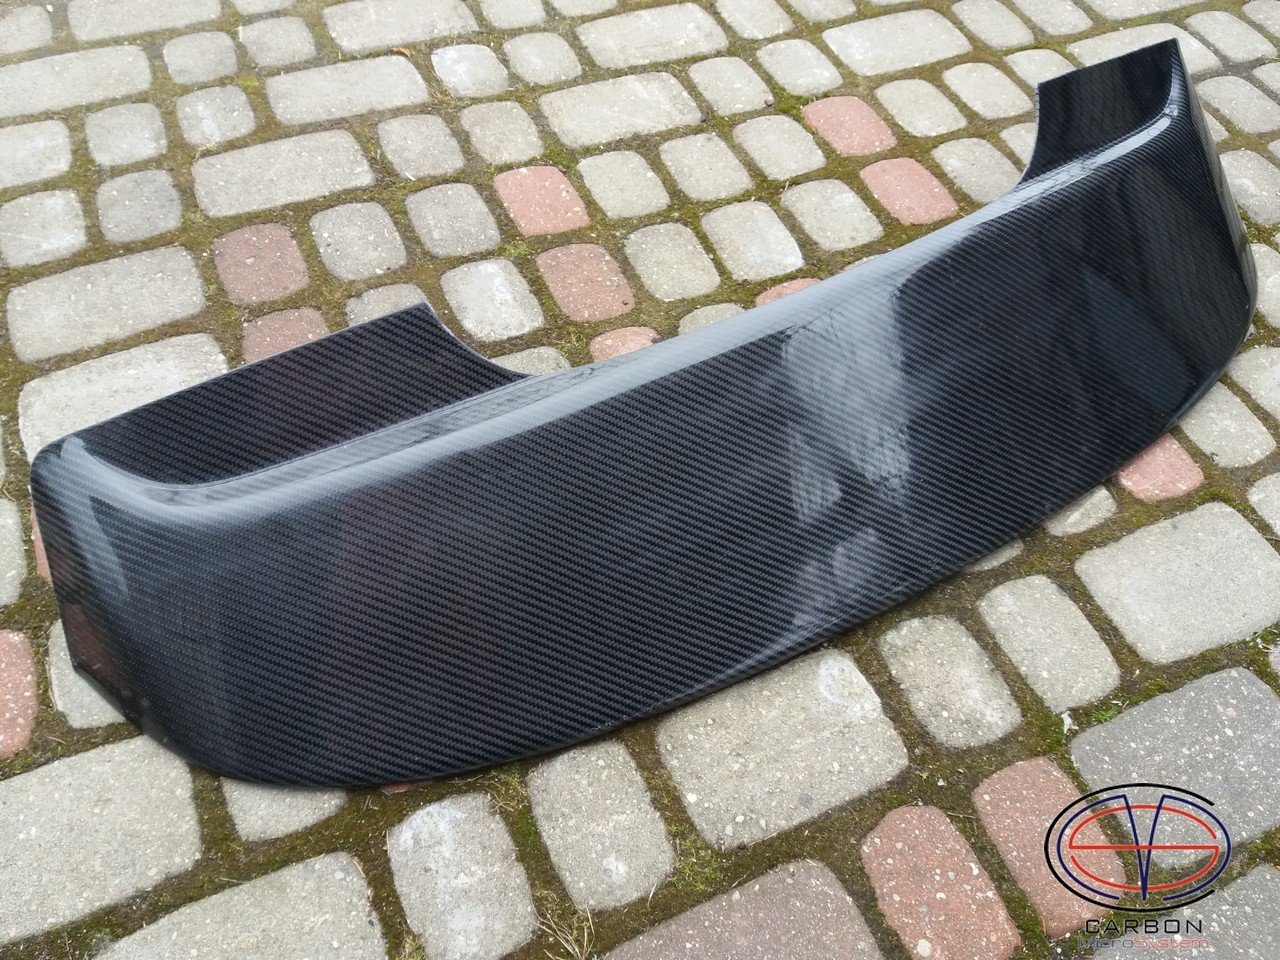 Manufacturing defect - NO RETURN - Rear roof Spoiler from Carbon Fiber for TOYOTA Celica ST202, ST205 GT4